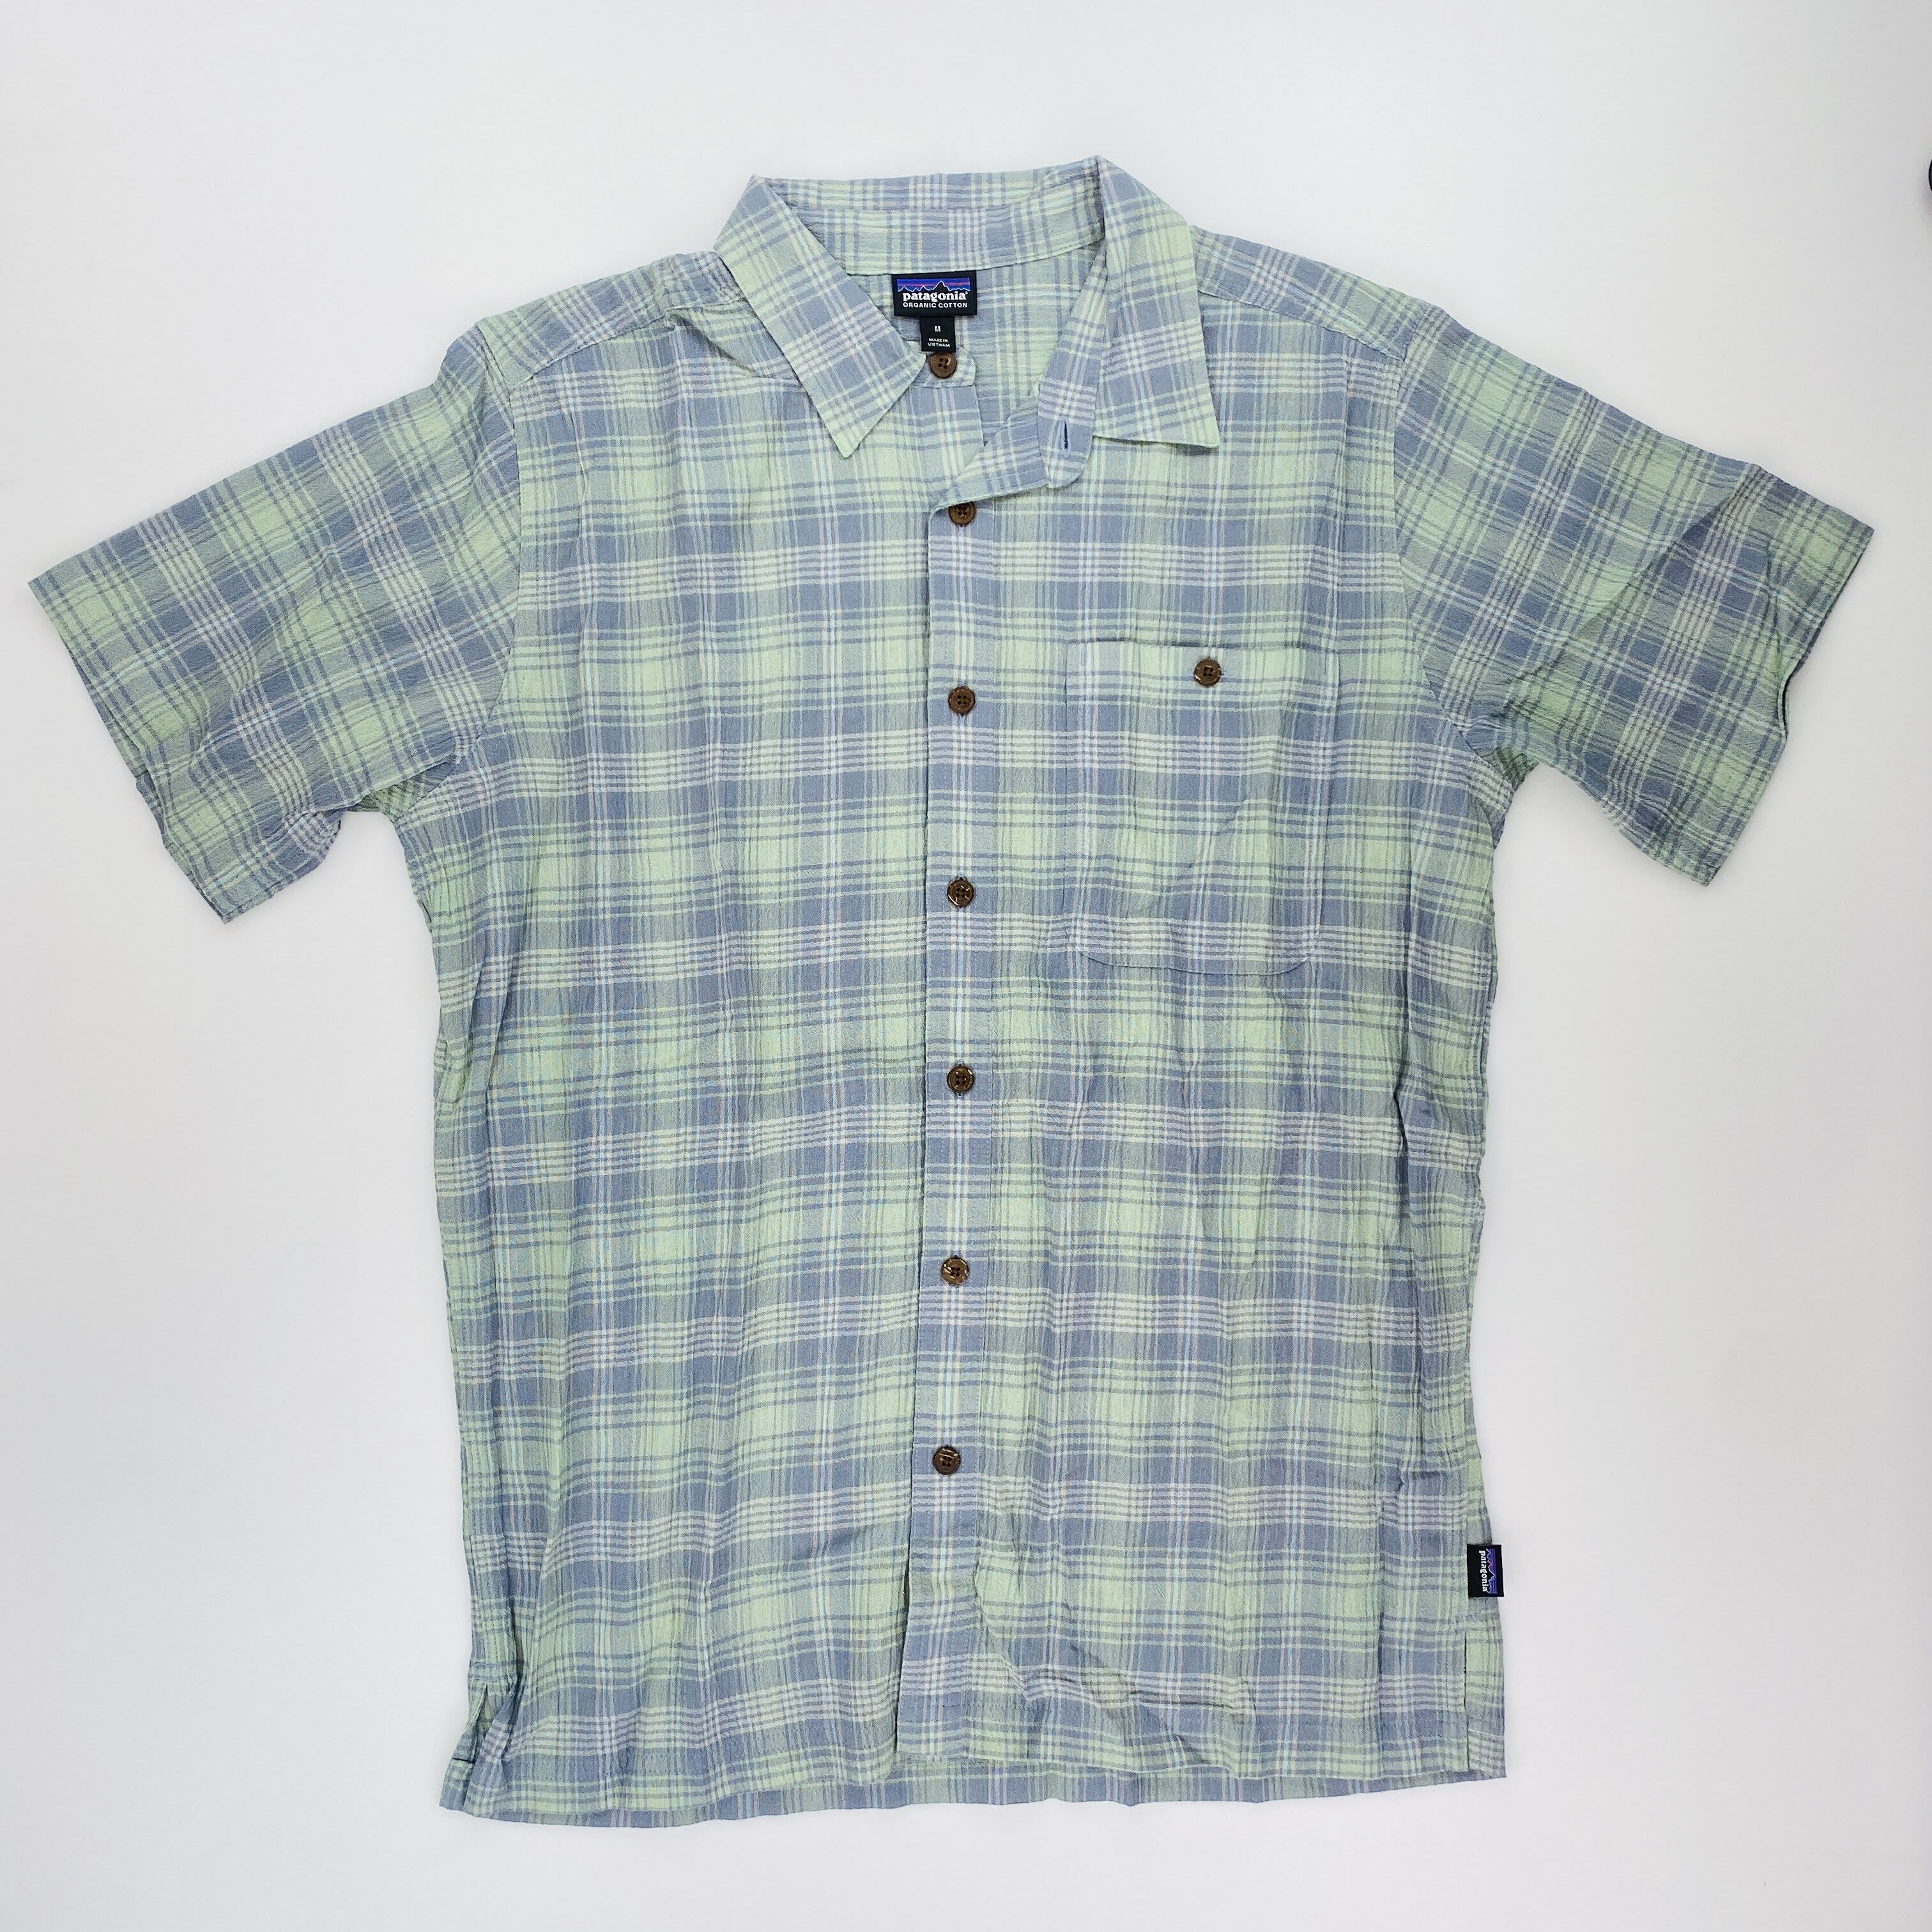 Patagonia M's A/C Shirt - Seconde main Chemise homme - Gris - M | Hardloop